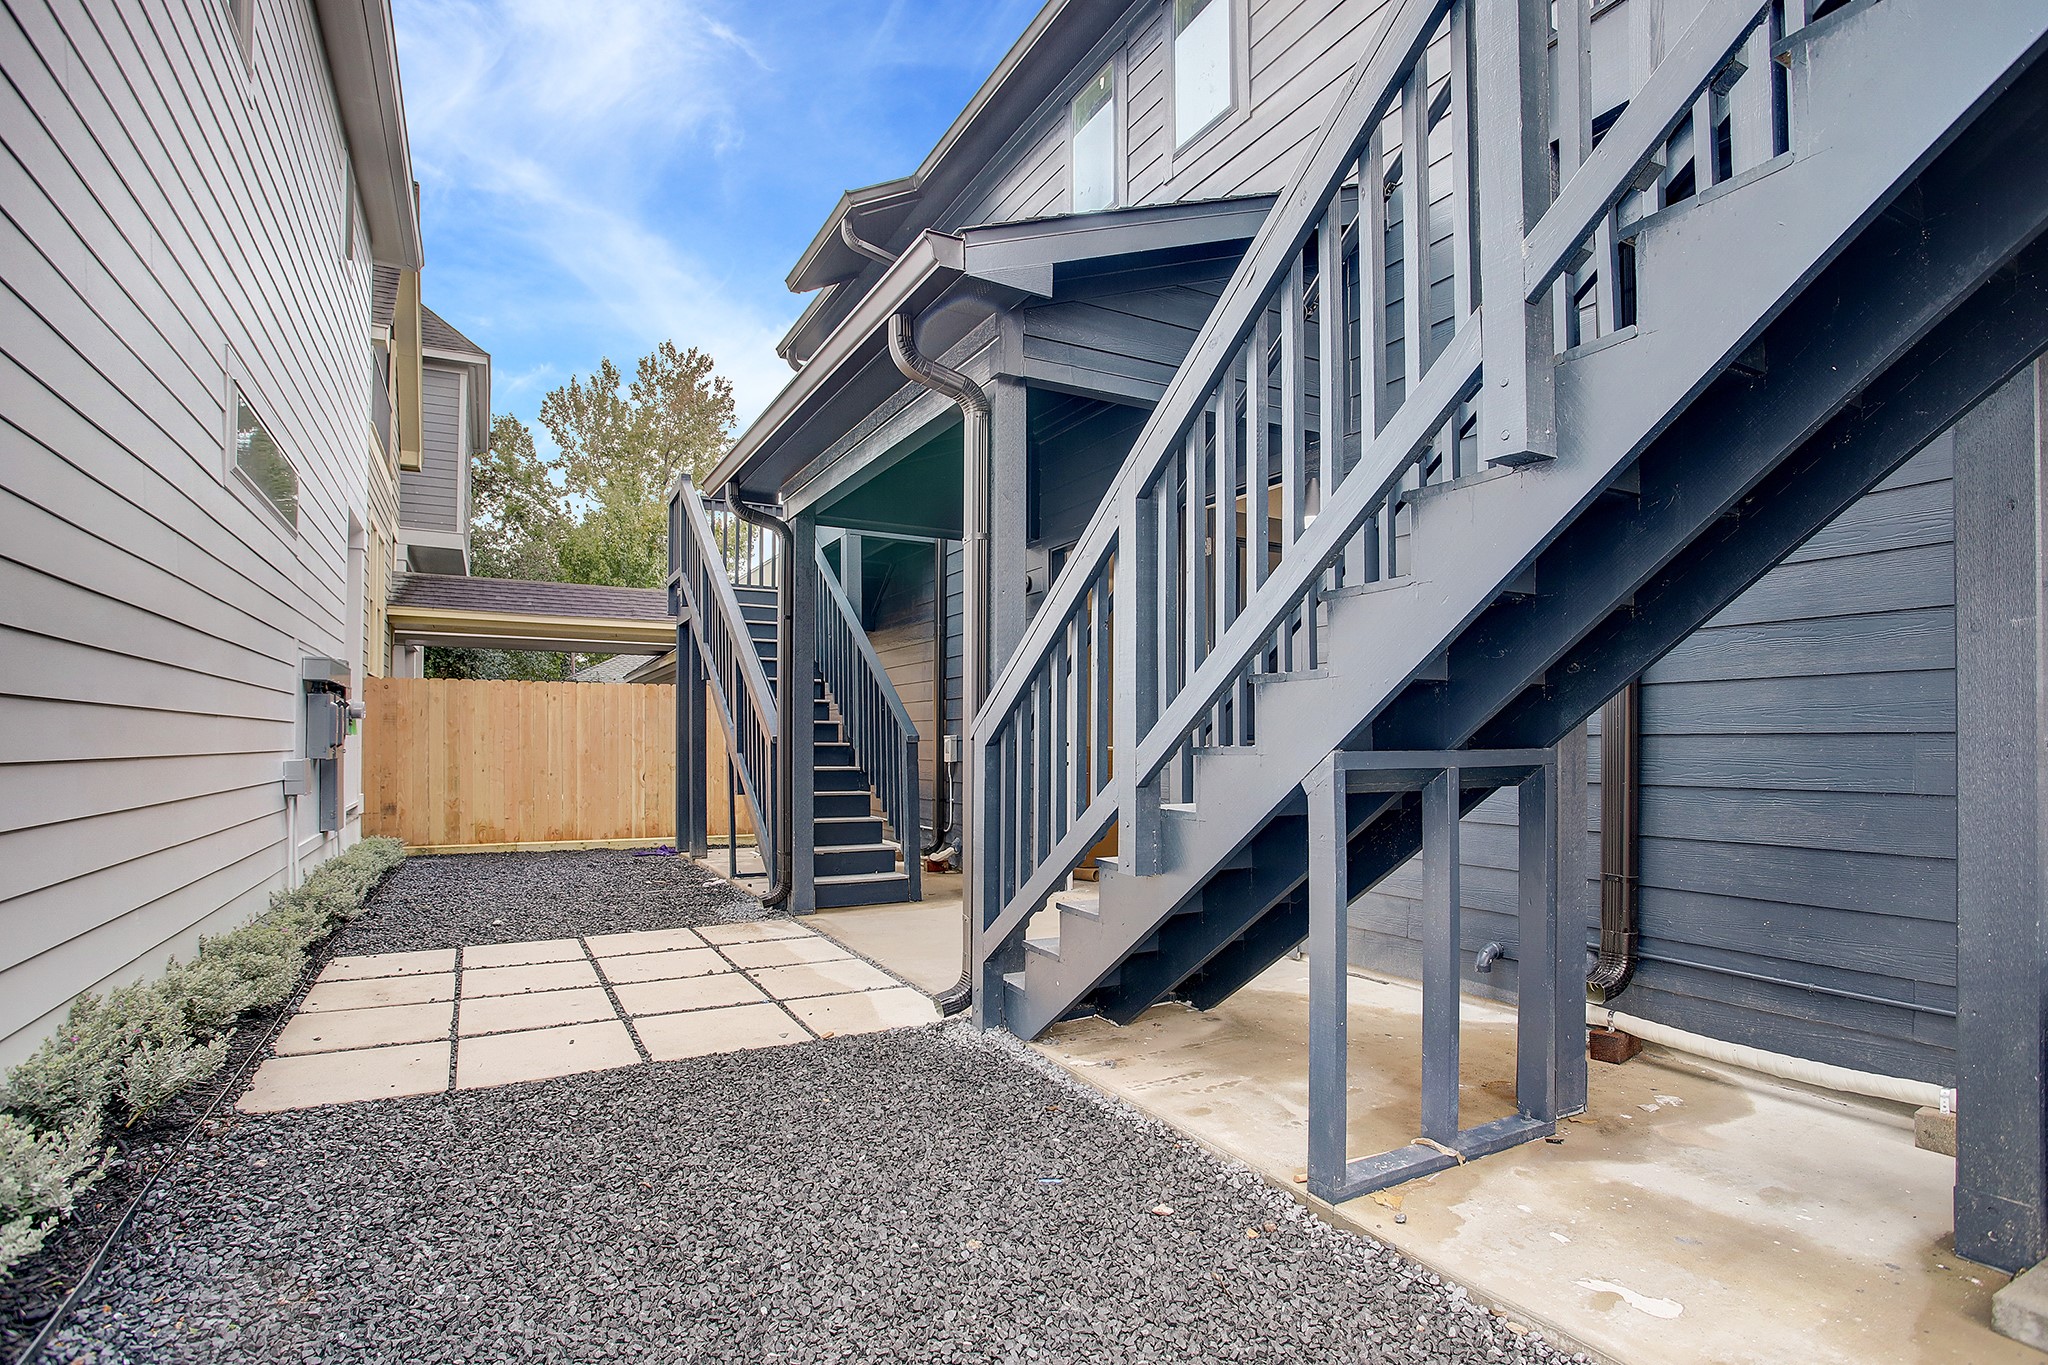 Common shared patio space and access to Unit 4 & 5.